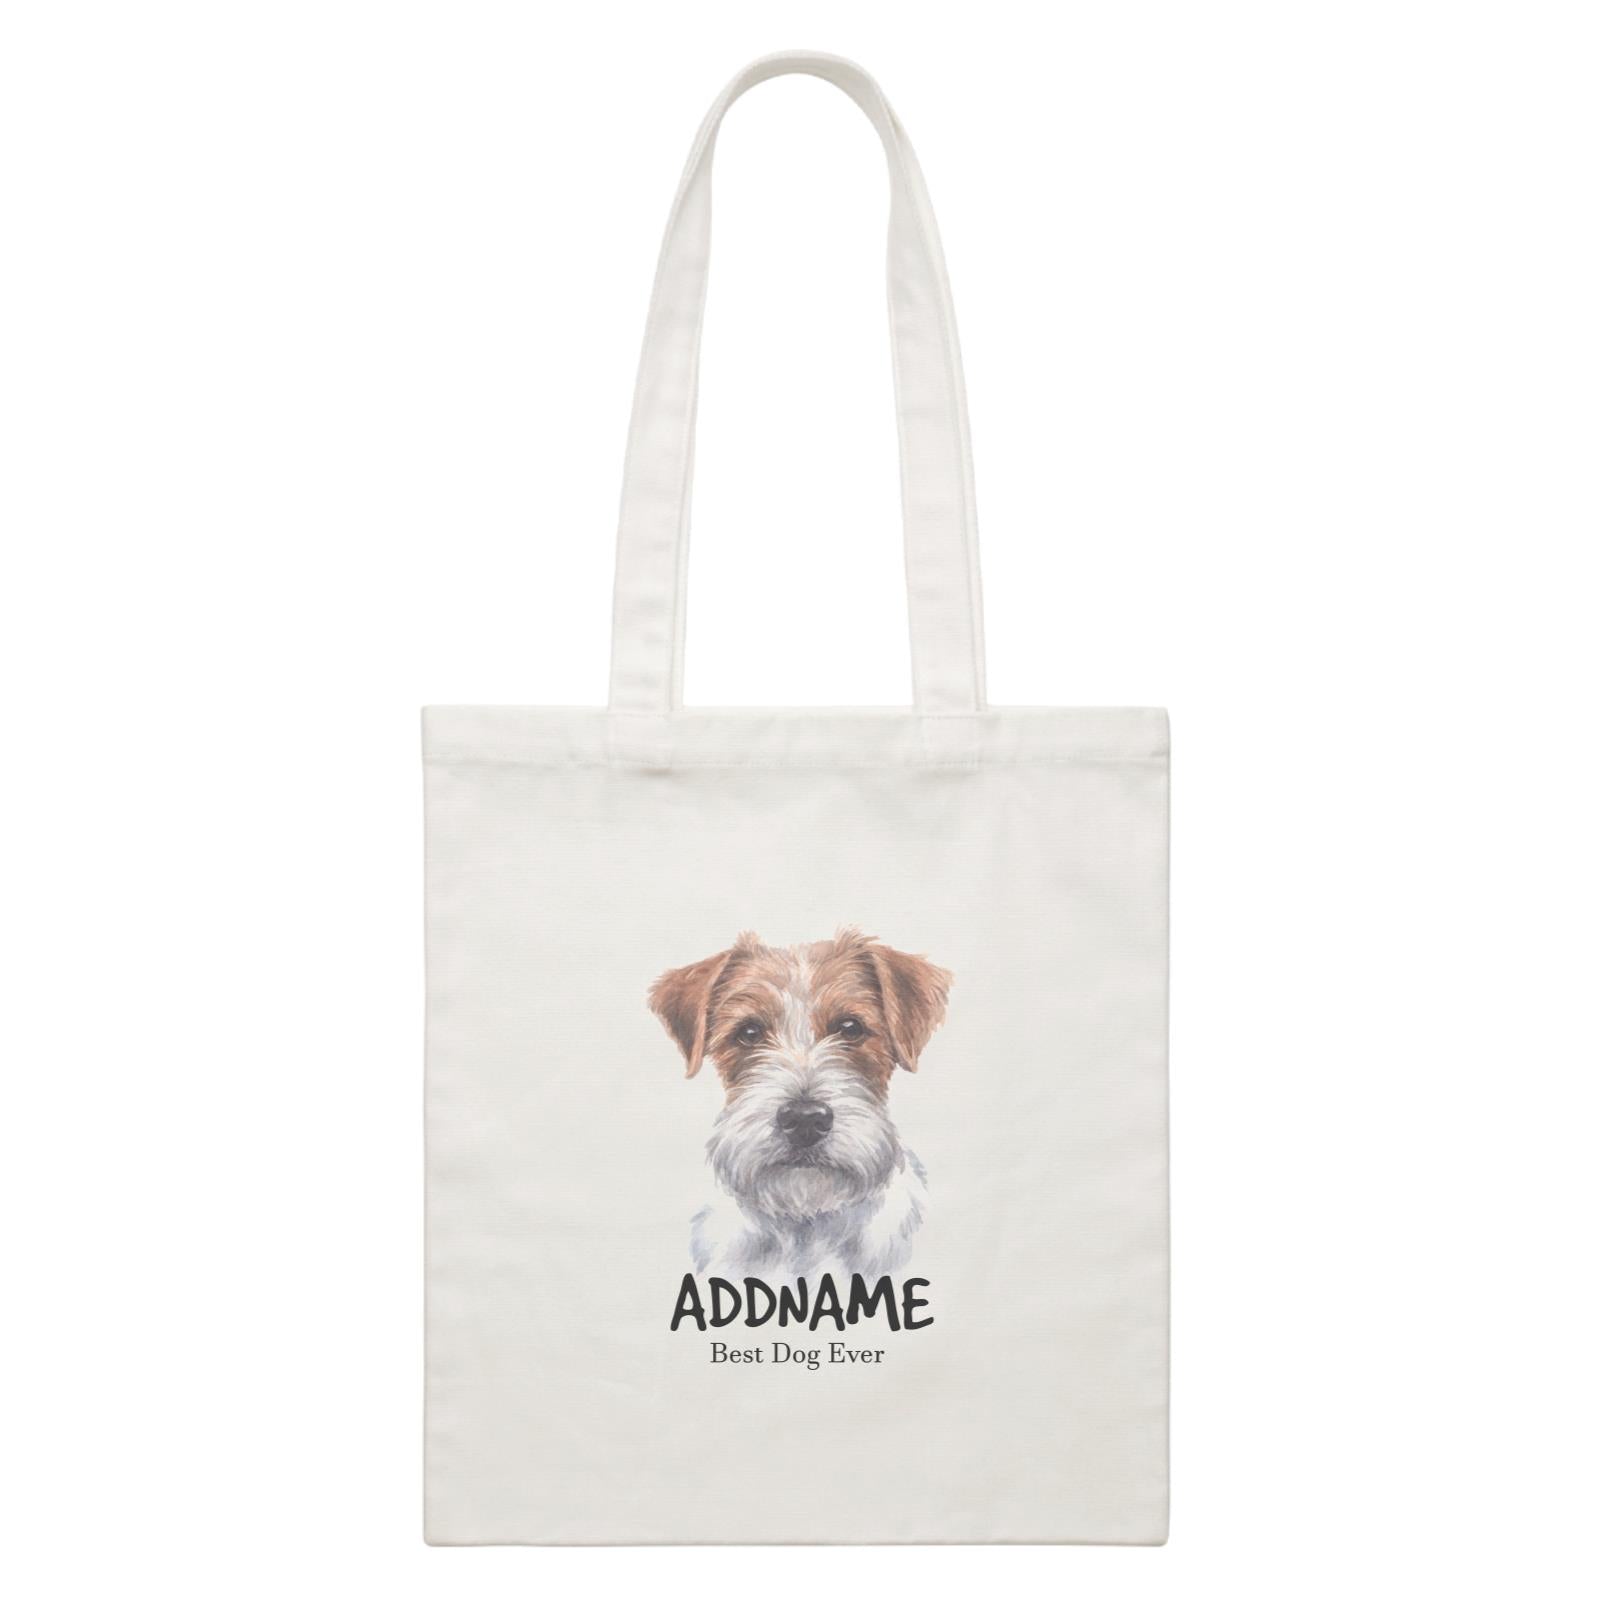 Watercolor Dog Jack Russell Hairy Best Dog Ever Addname White Canvas Bag